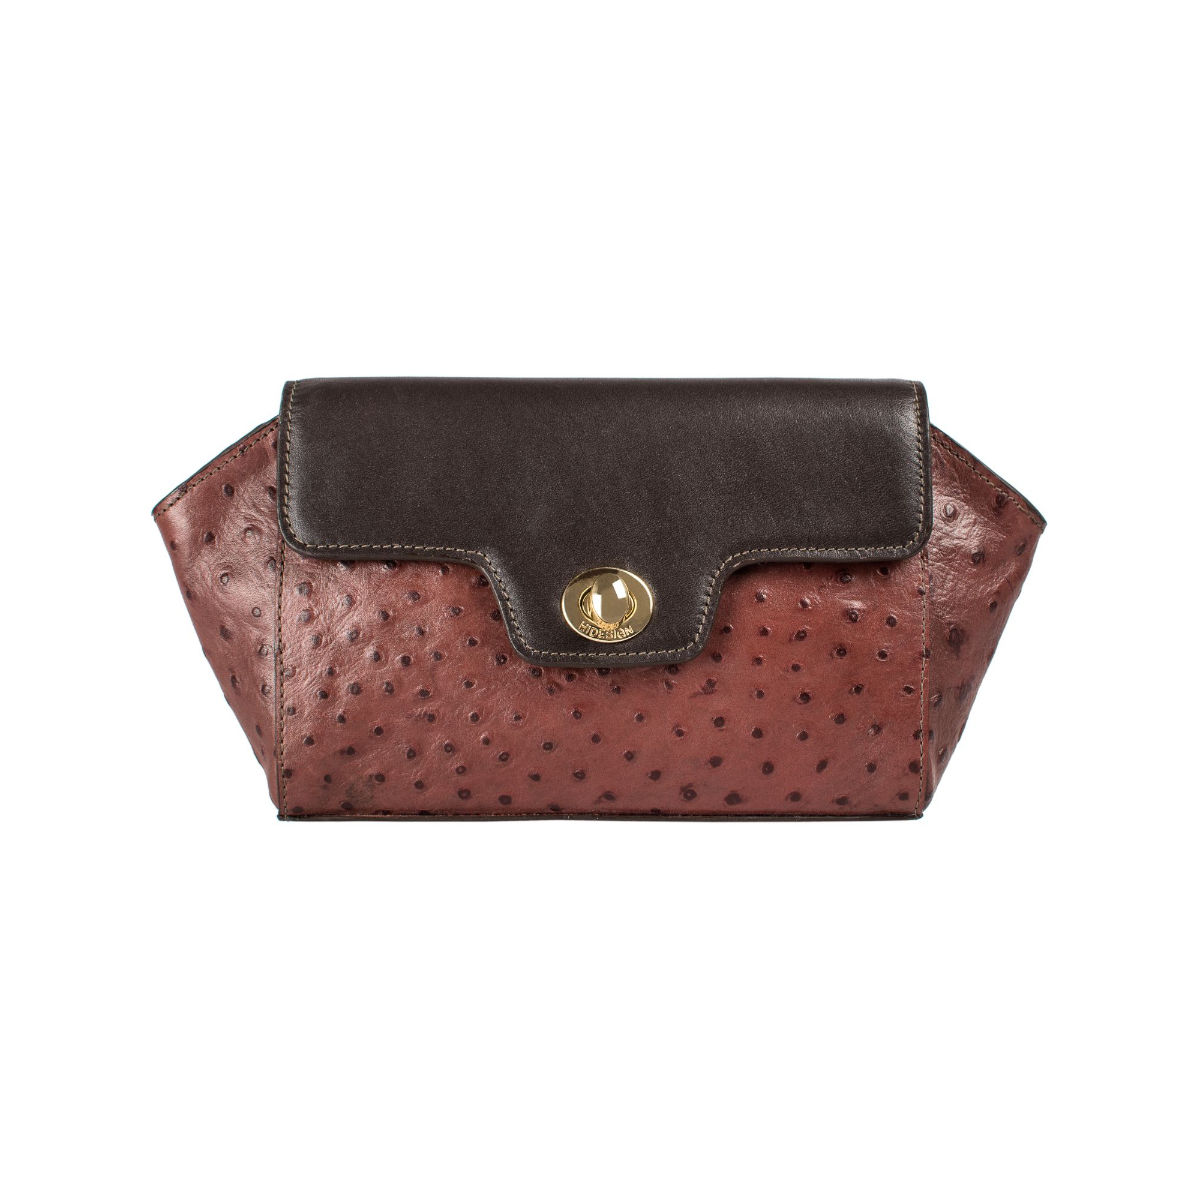 Buy Hidesign Hidesign Women Brown Textured Leather Pouch at Redfynd